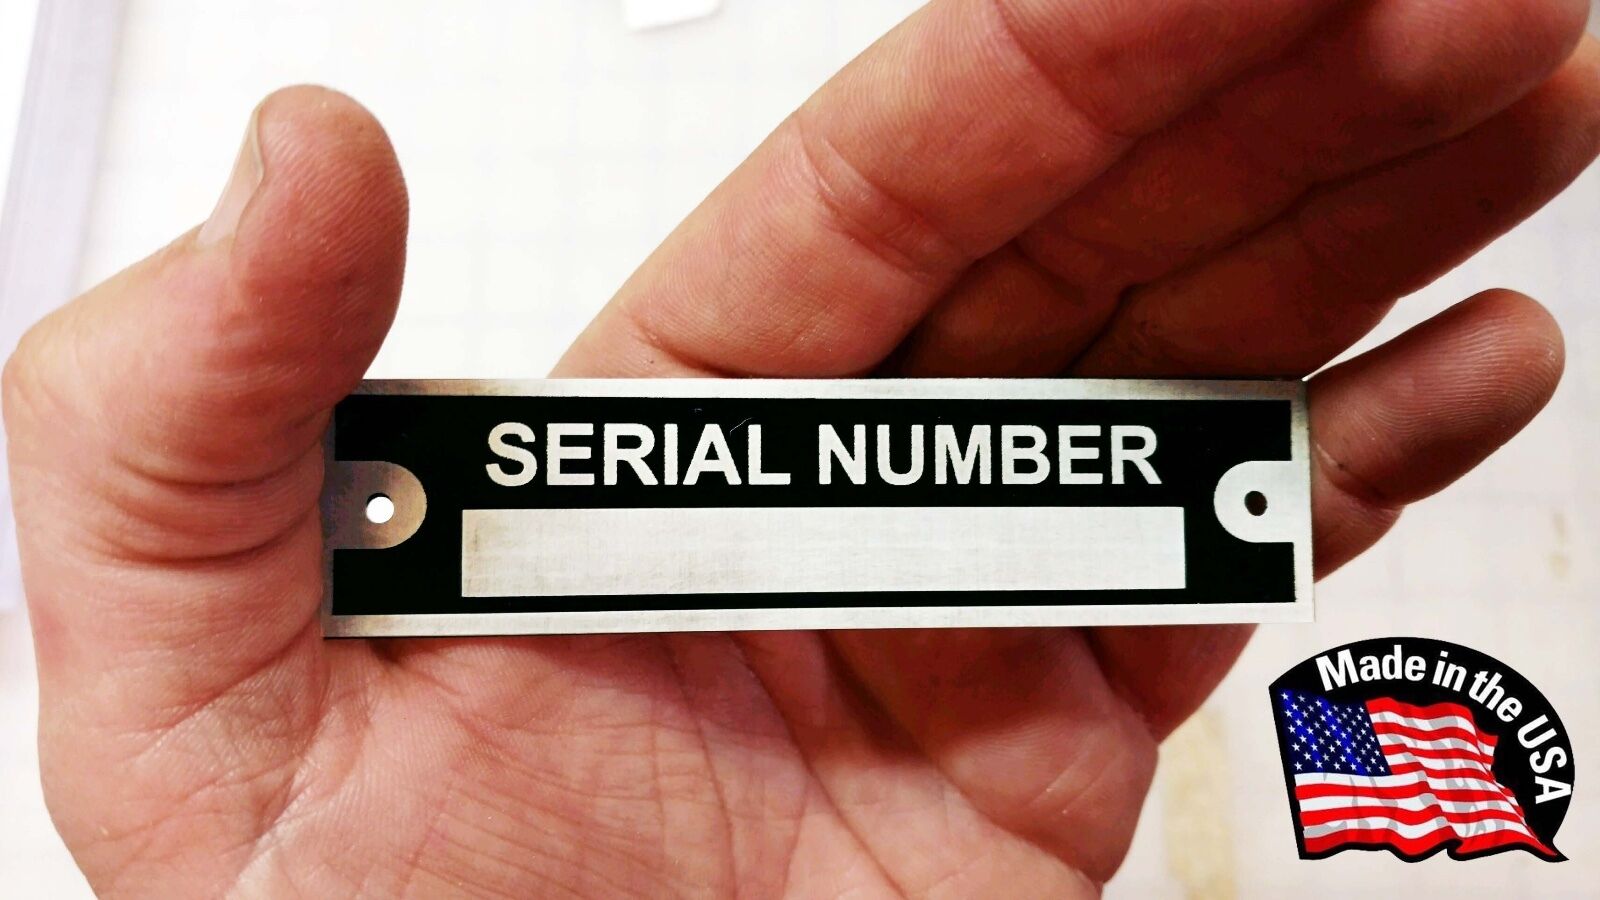 SERIAL NUMBER TAG BLANK VEHICLE MACHINE IDENTIFICATION ALUMINUM USA MADE